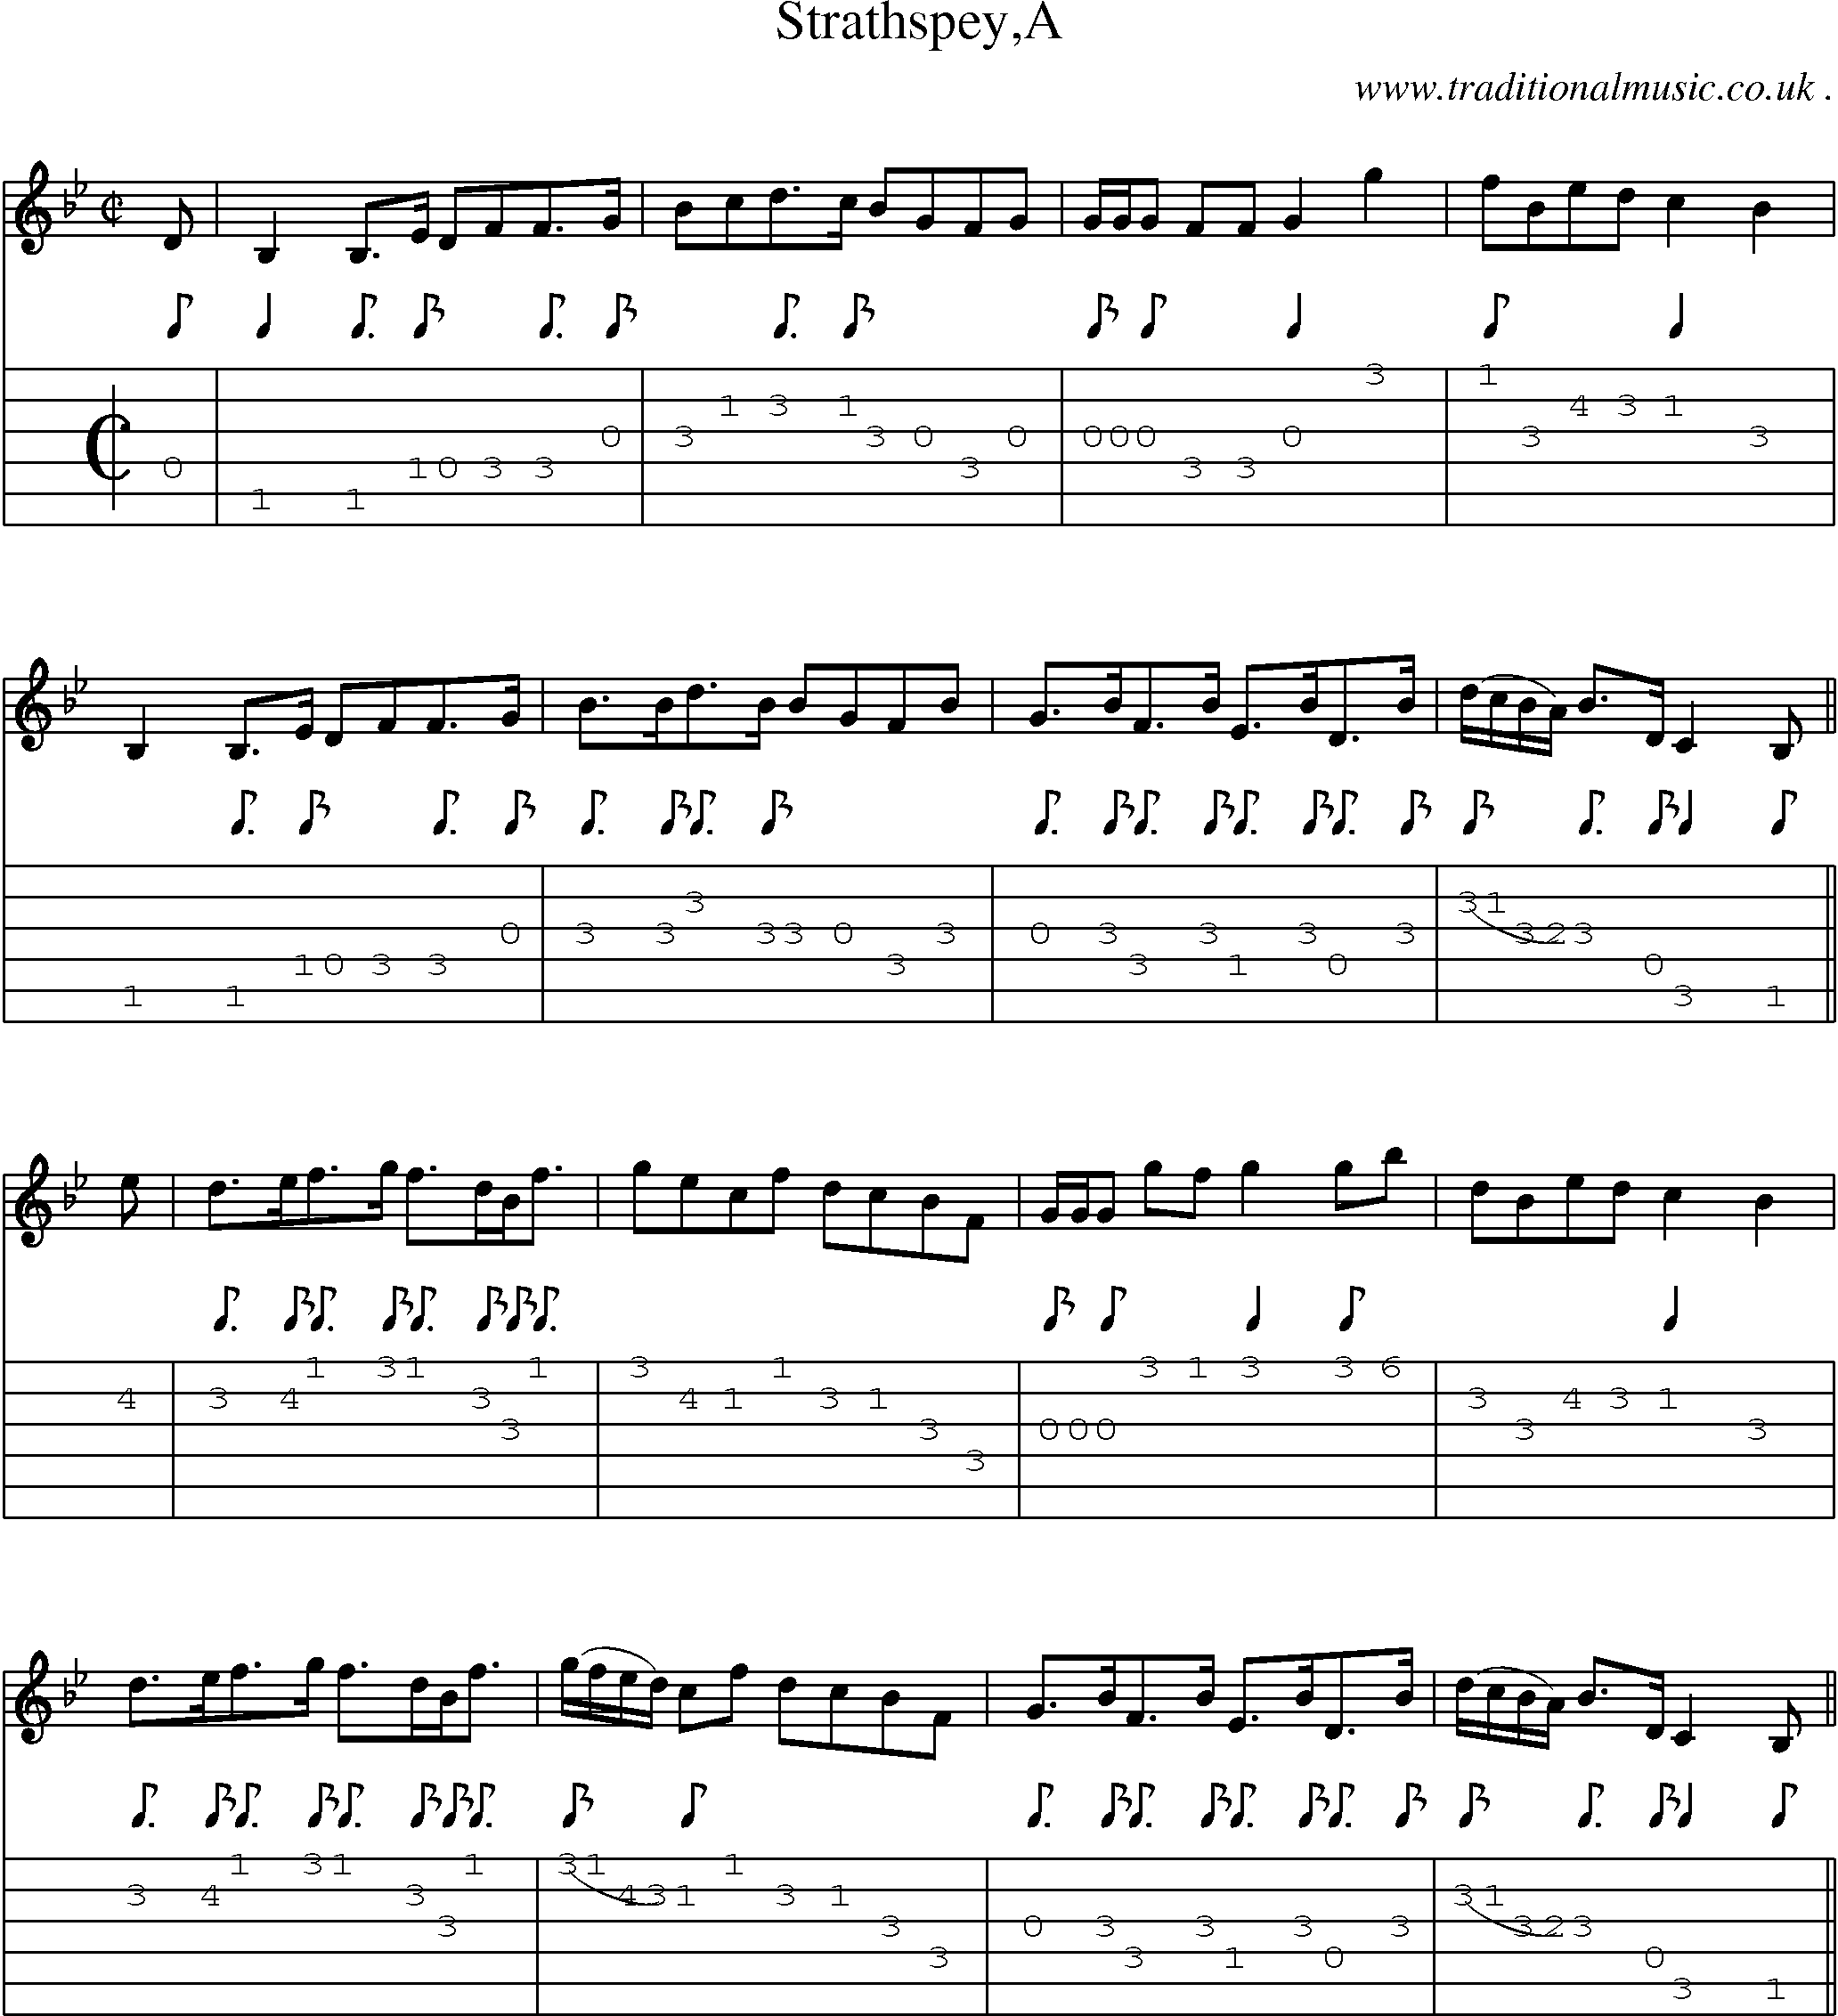 Sheet-Music and Guitar Tabs for Strathspeya